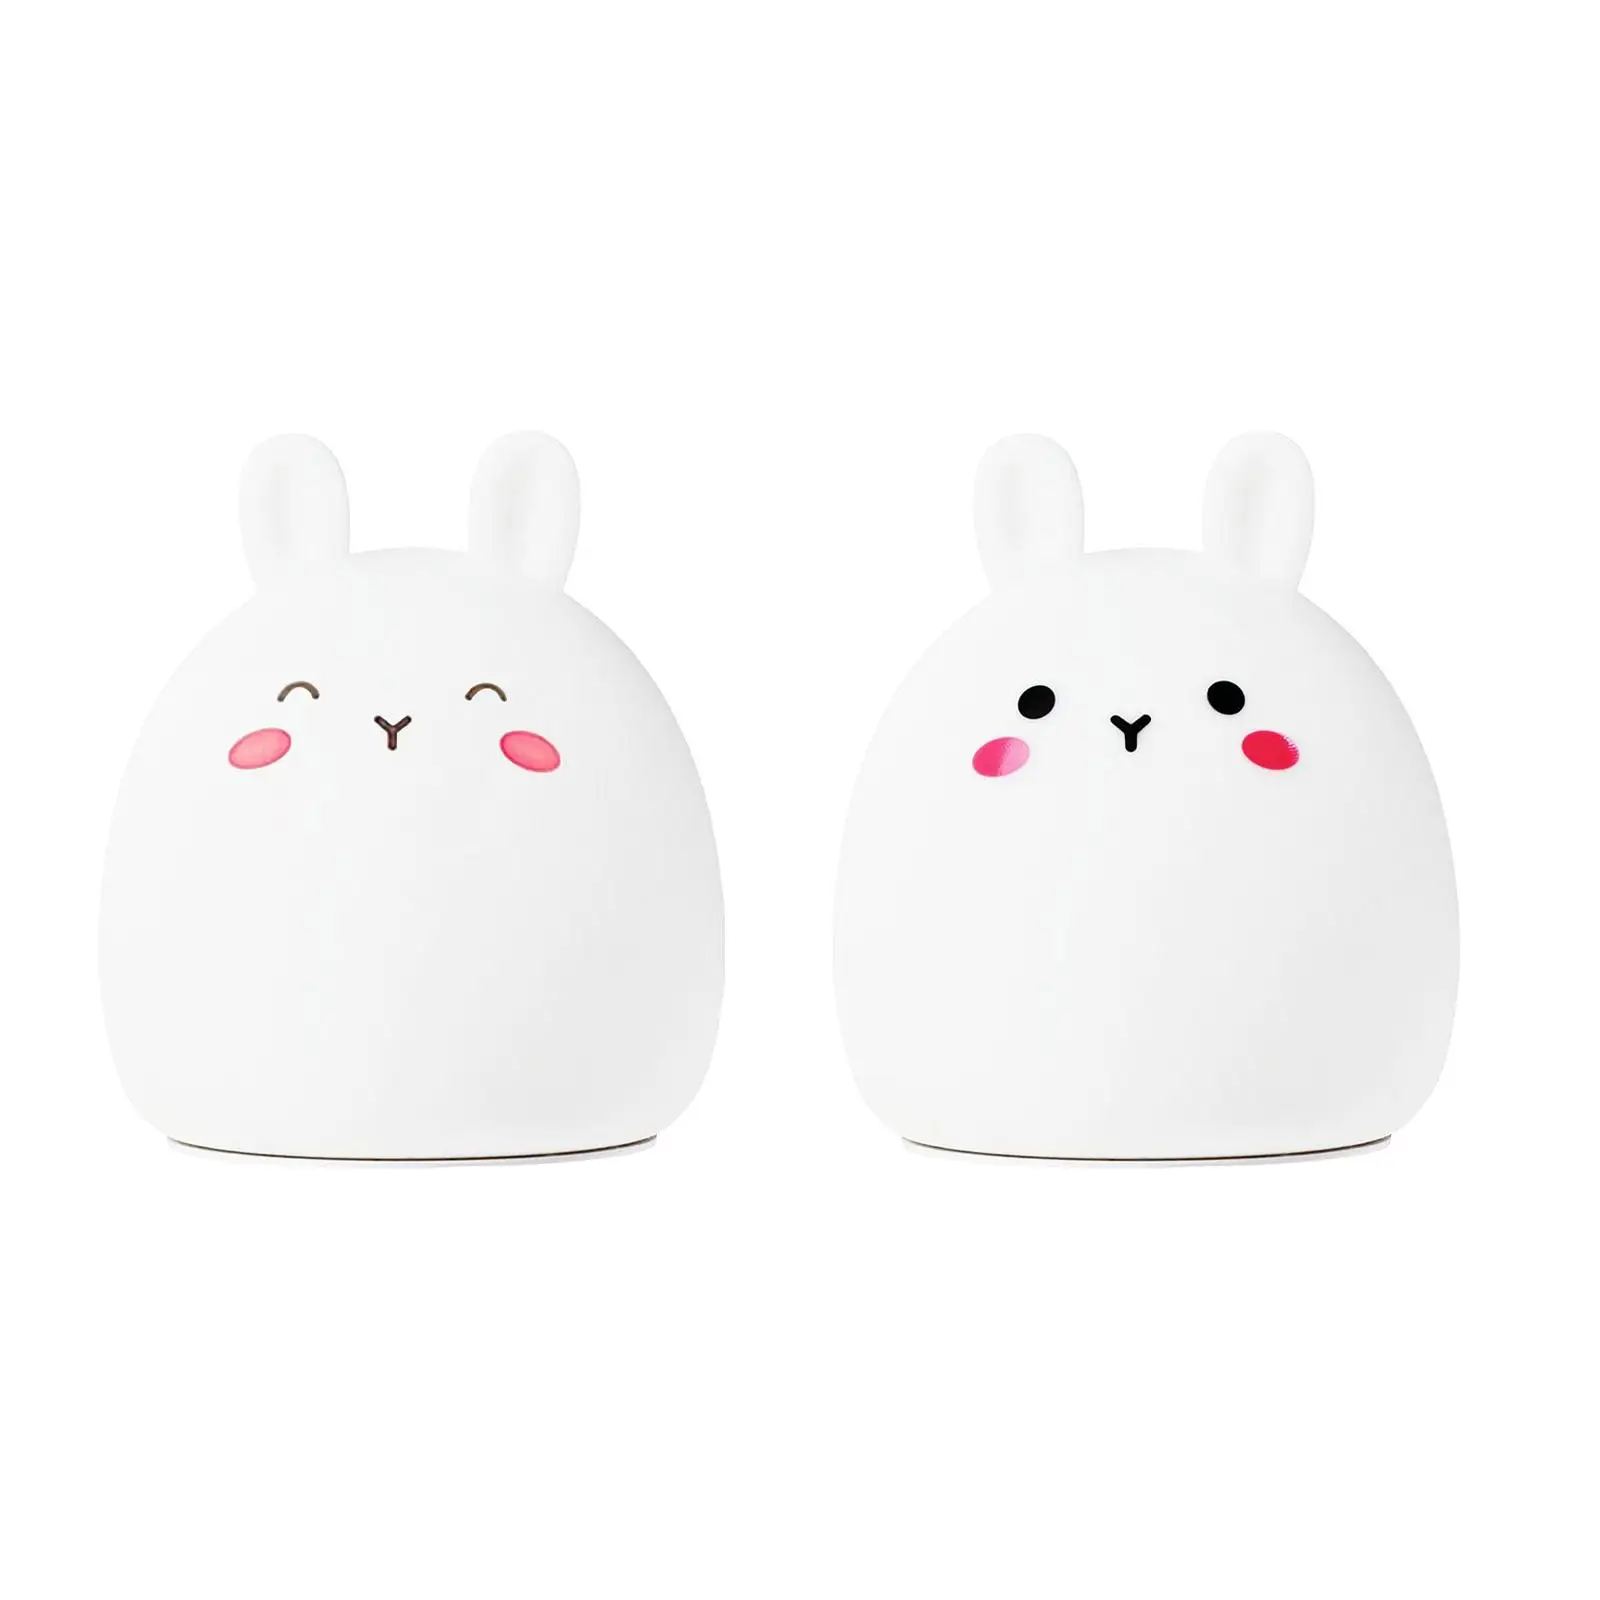 Bunny Night Lights Silicone Color Changing Touch Control Dimming Rabbit Lamp for Kids Living Room Ornament Bathroom Sleeping